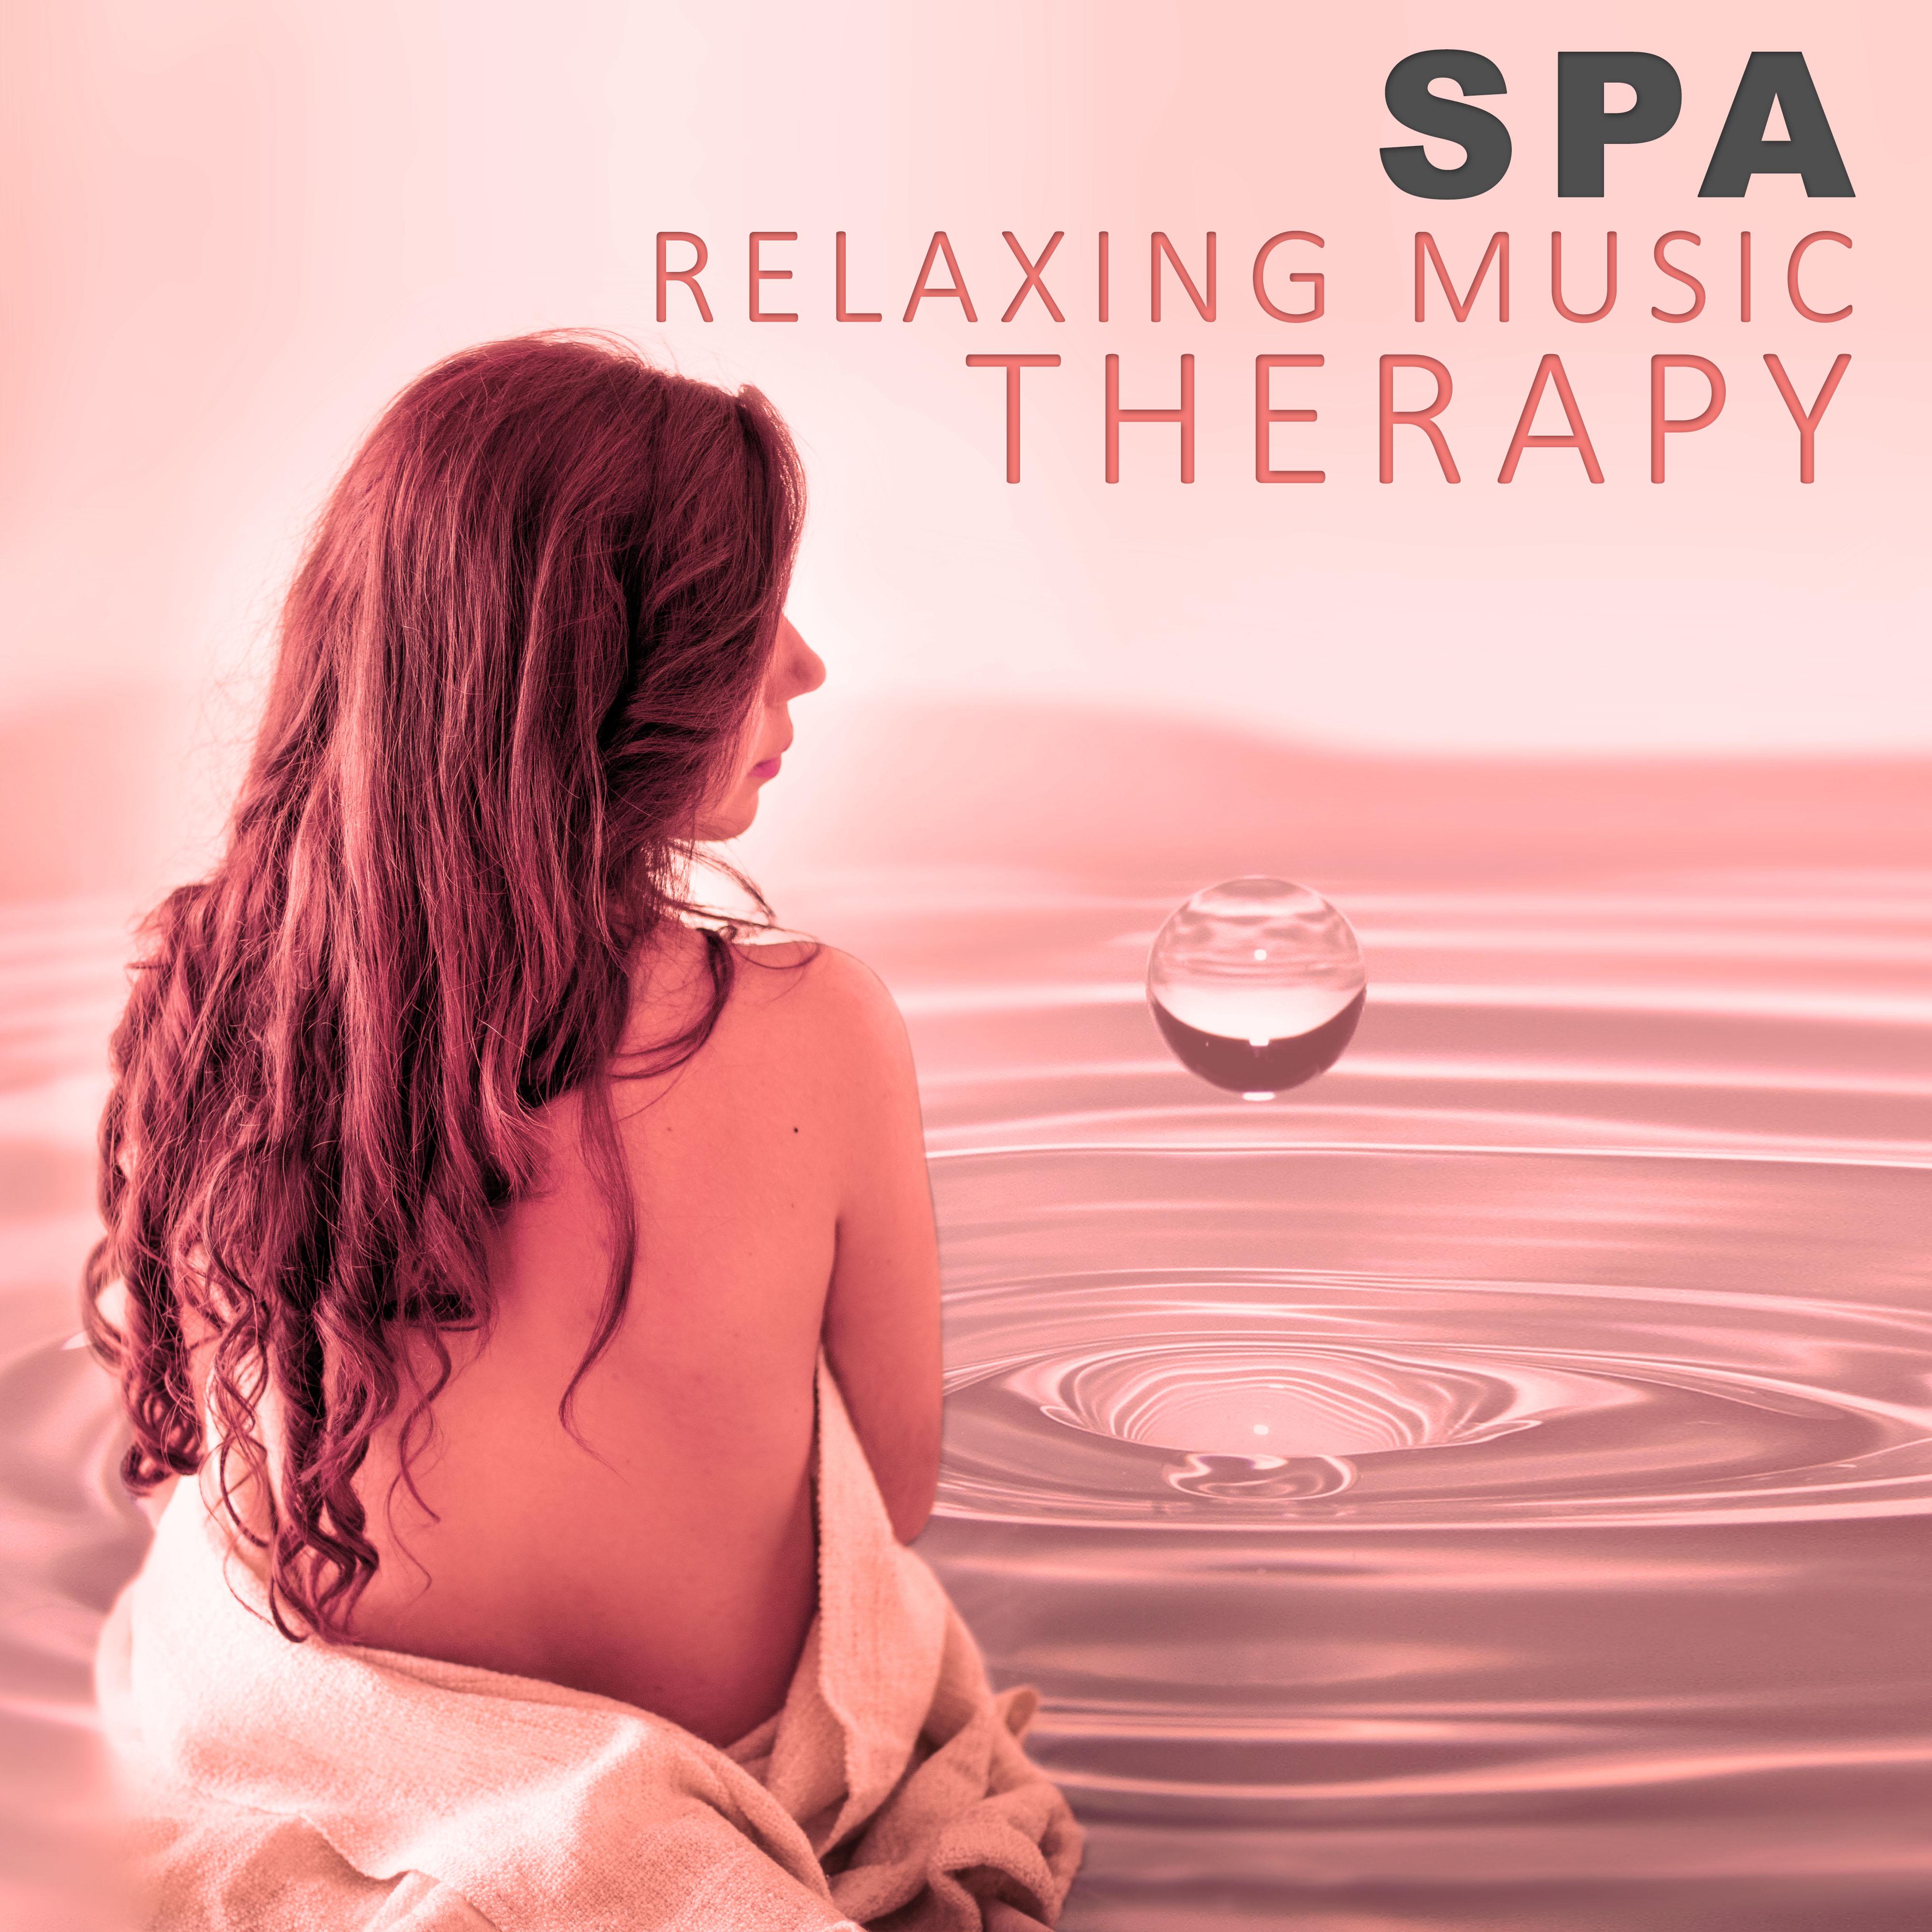 Spa Relaxing Music Therapy – Nature Sounds, Stress Relief, Inner Silence, Ambient, Pure Relaxation, Spa, Massage